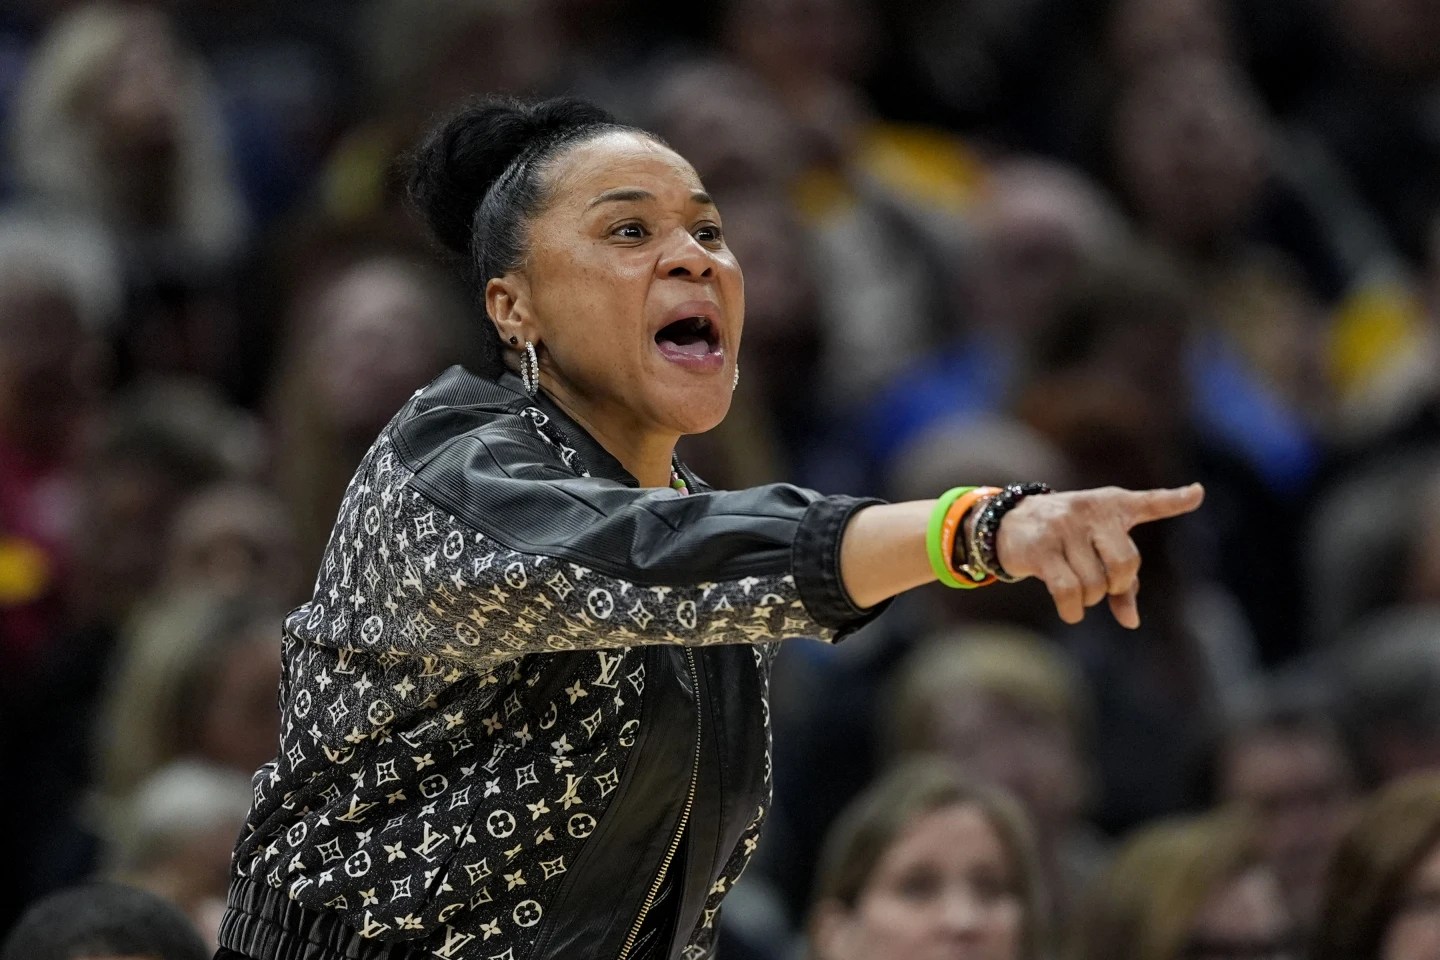 South Carolina women’s hoops coach Dawn Staley says transgender athletes should be allowed to play